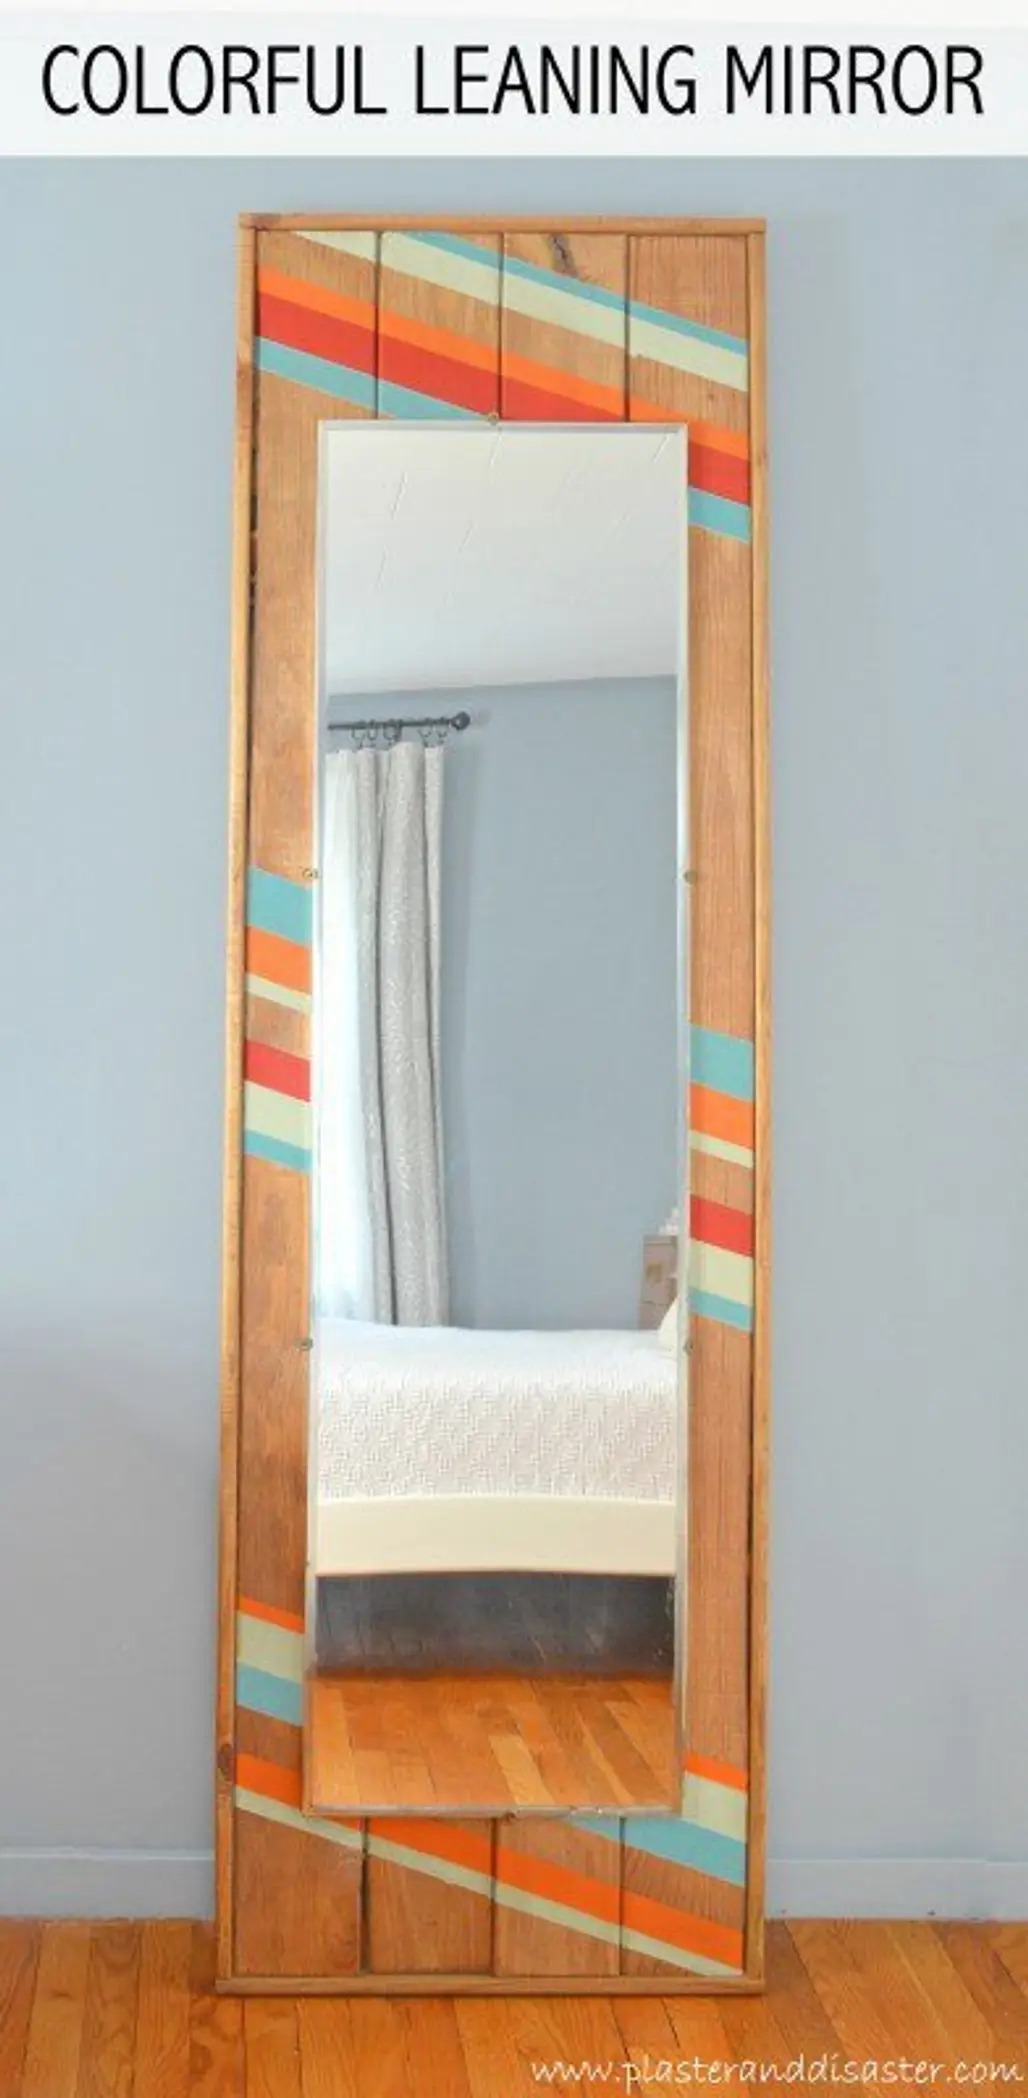 Make a Colorful Leaning Mirror